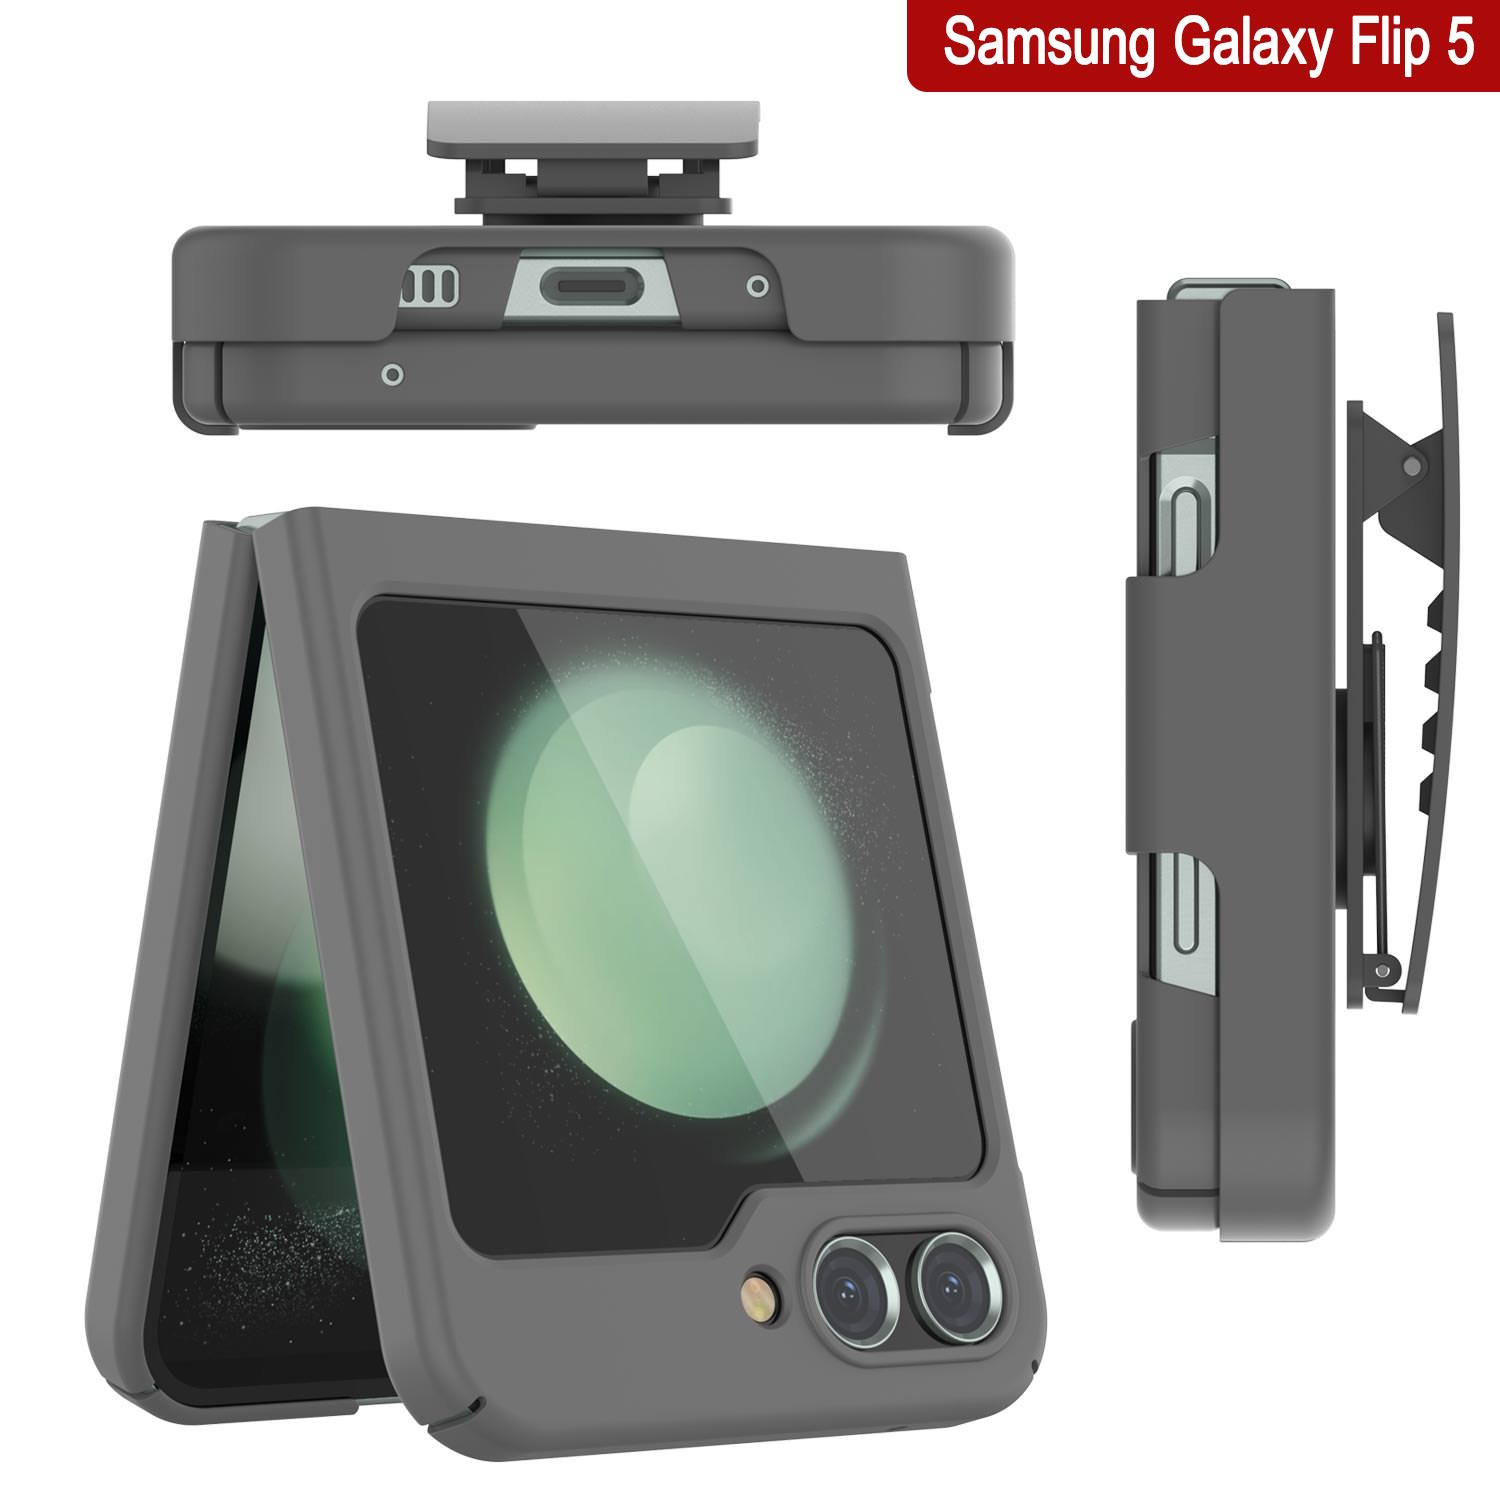 Galaxy Z Flip5 Case With Tempered Glass Screen Protector, Holster Belt Clip & Built-In Kickstand [Grey]